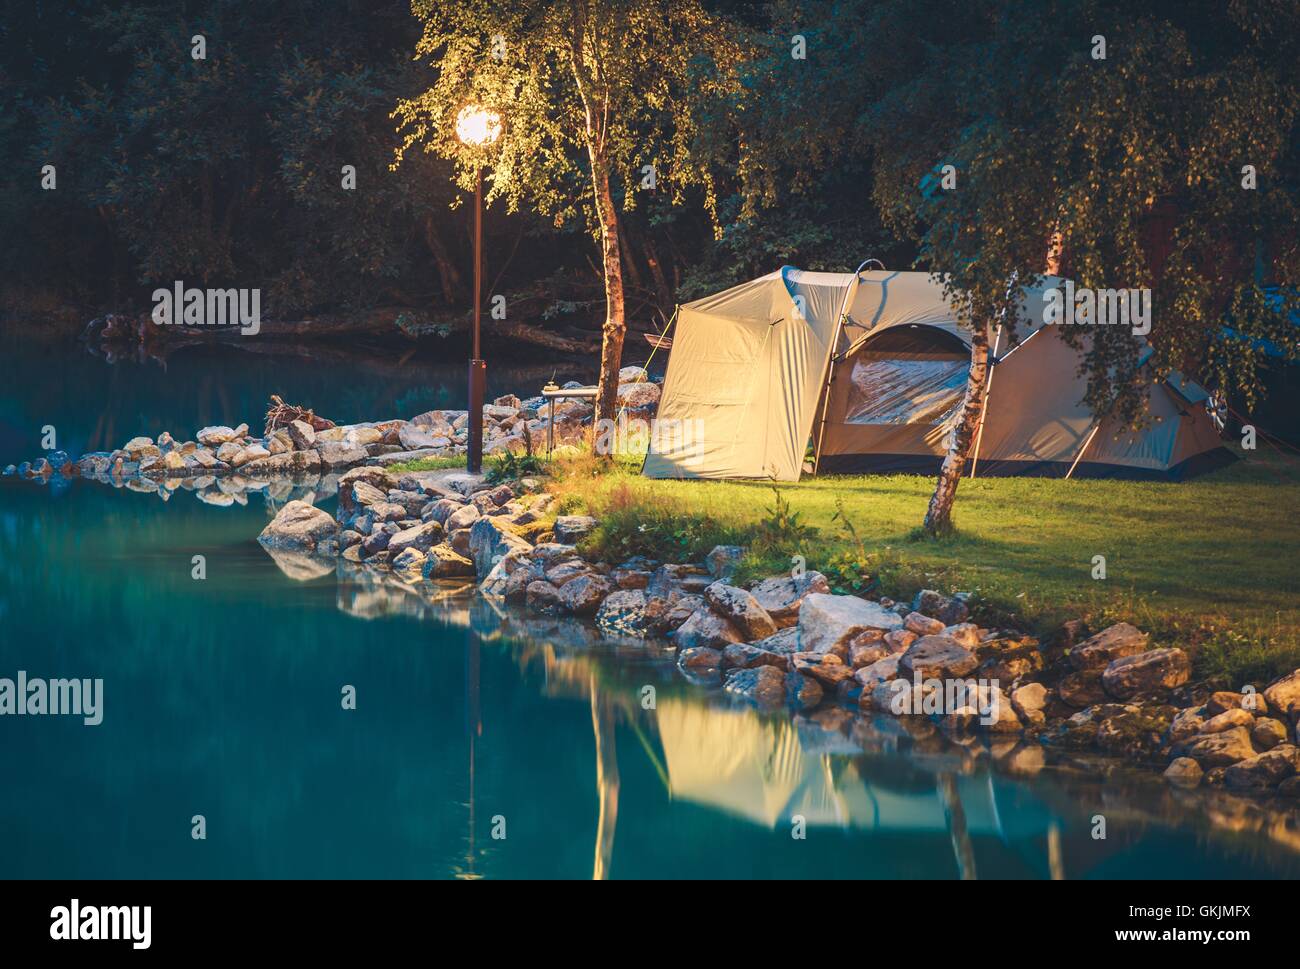 Tenting on the Glaciar Lake. Campground Camping in a Tent. Stock Photo